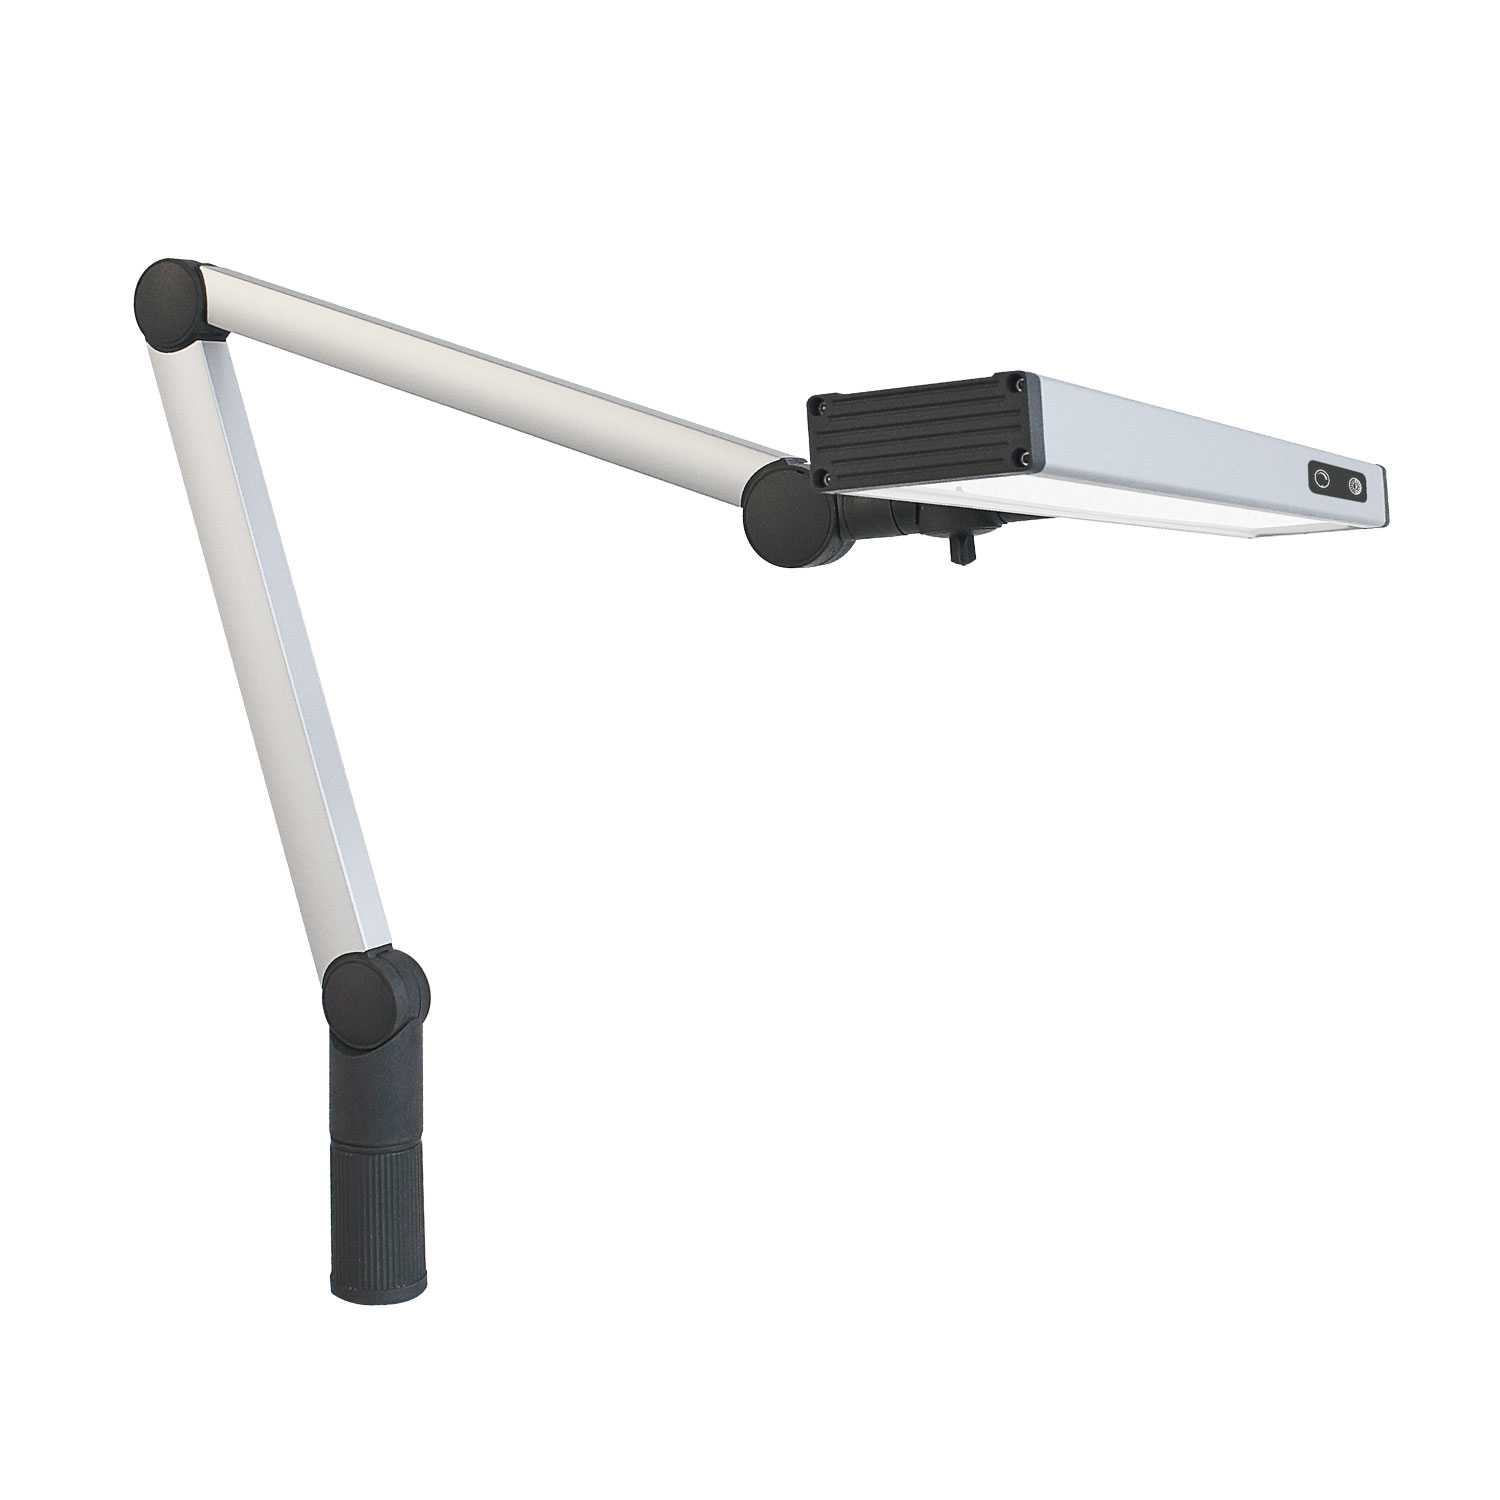 LED workplace light UNILED II TUNABLE WHITE articulated arm, 28W, 3000~6500K, light width 548 mm